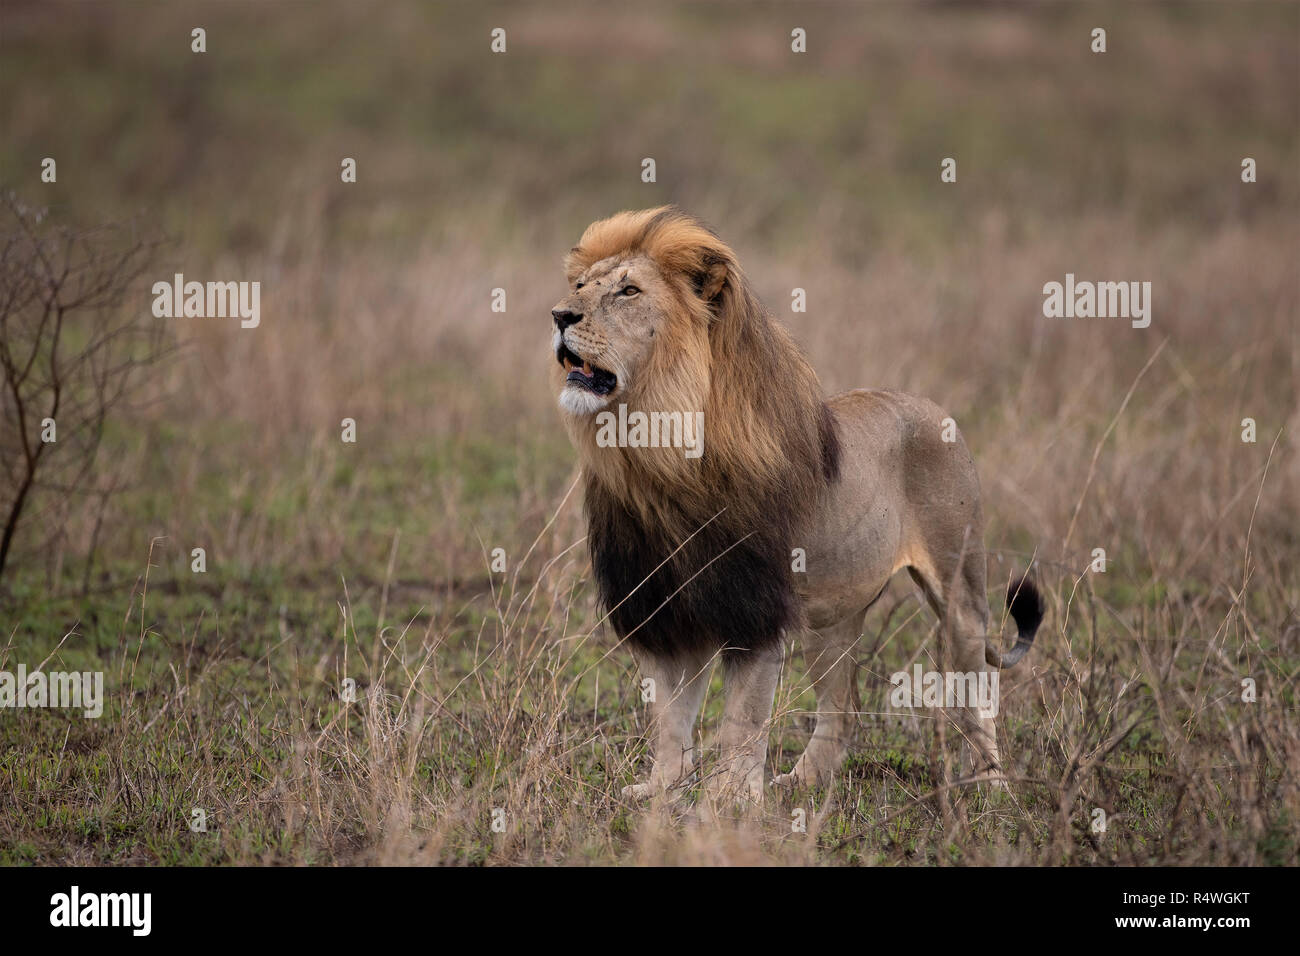 A big male lion surveying his territory in the Serengeti National Park, Tanzania Stock Photo